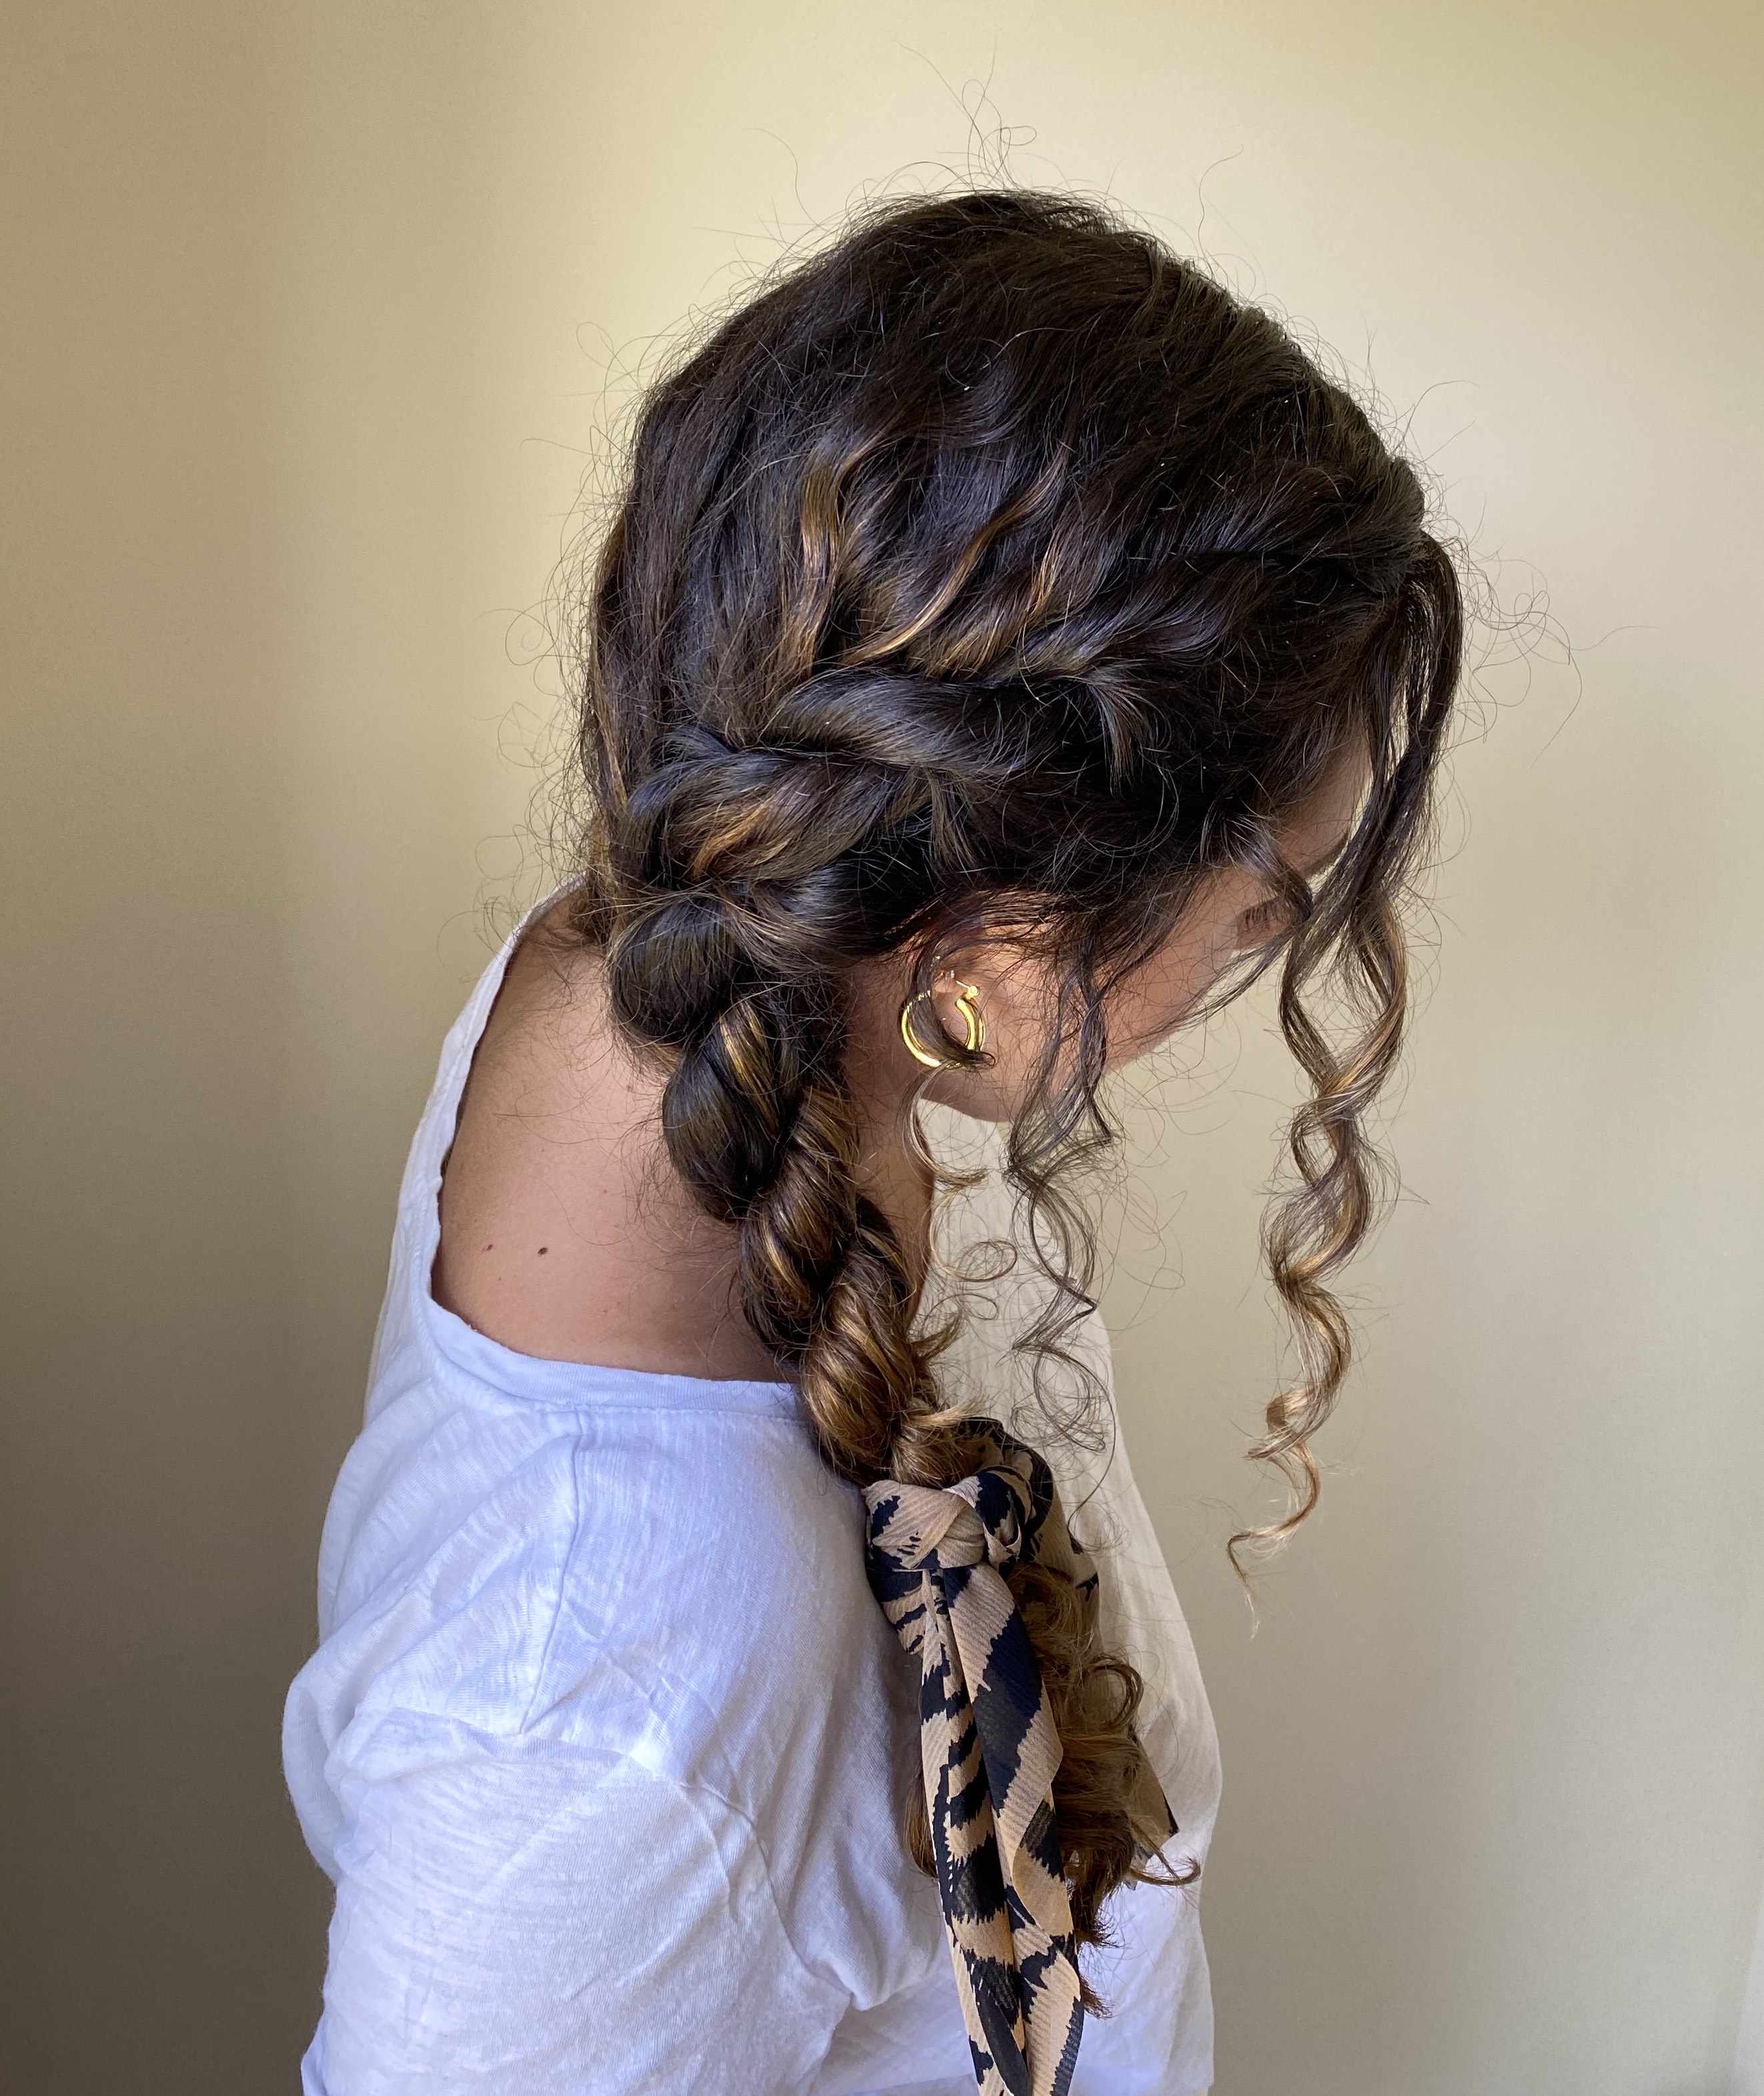 1 Hairstyle, 4 Ways: The Rope Braid | How to Do a Rope Braid